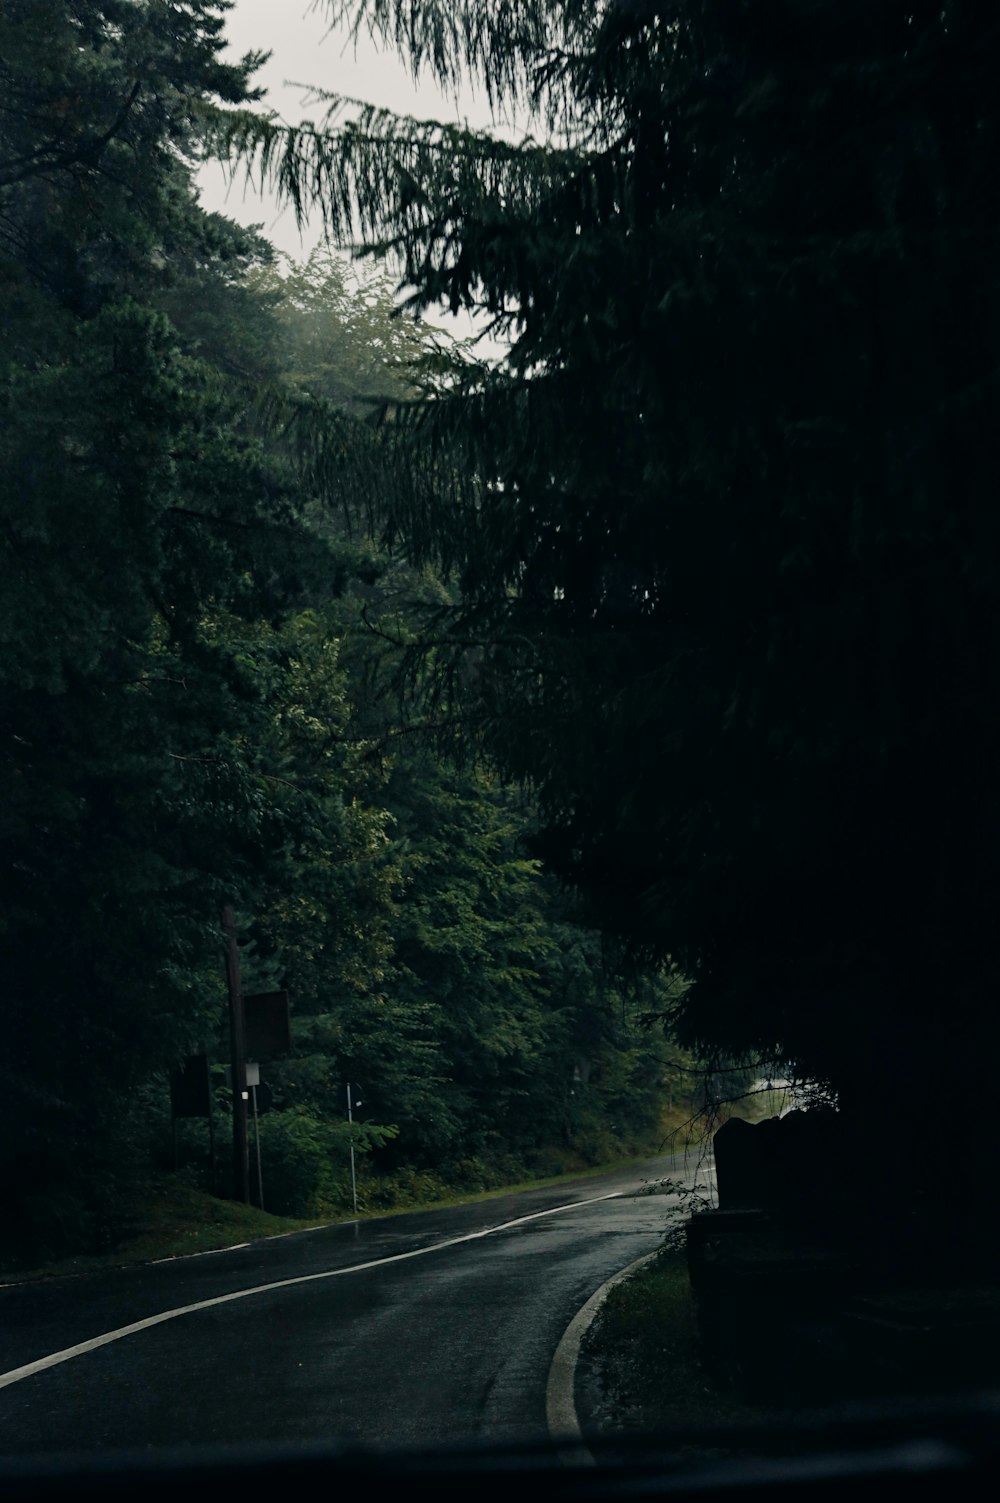 a car driving down a road next to a forest